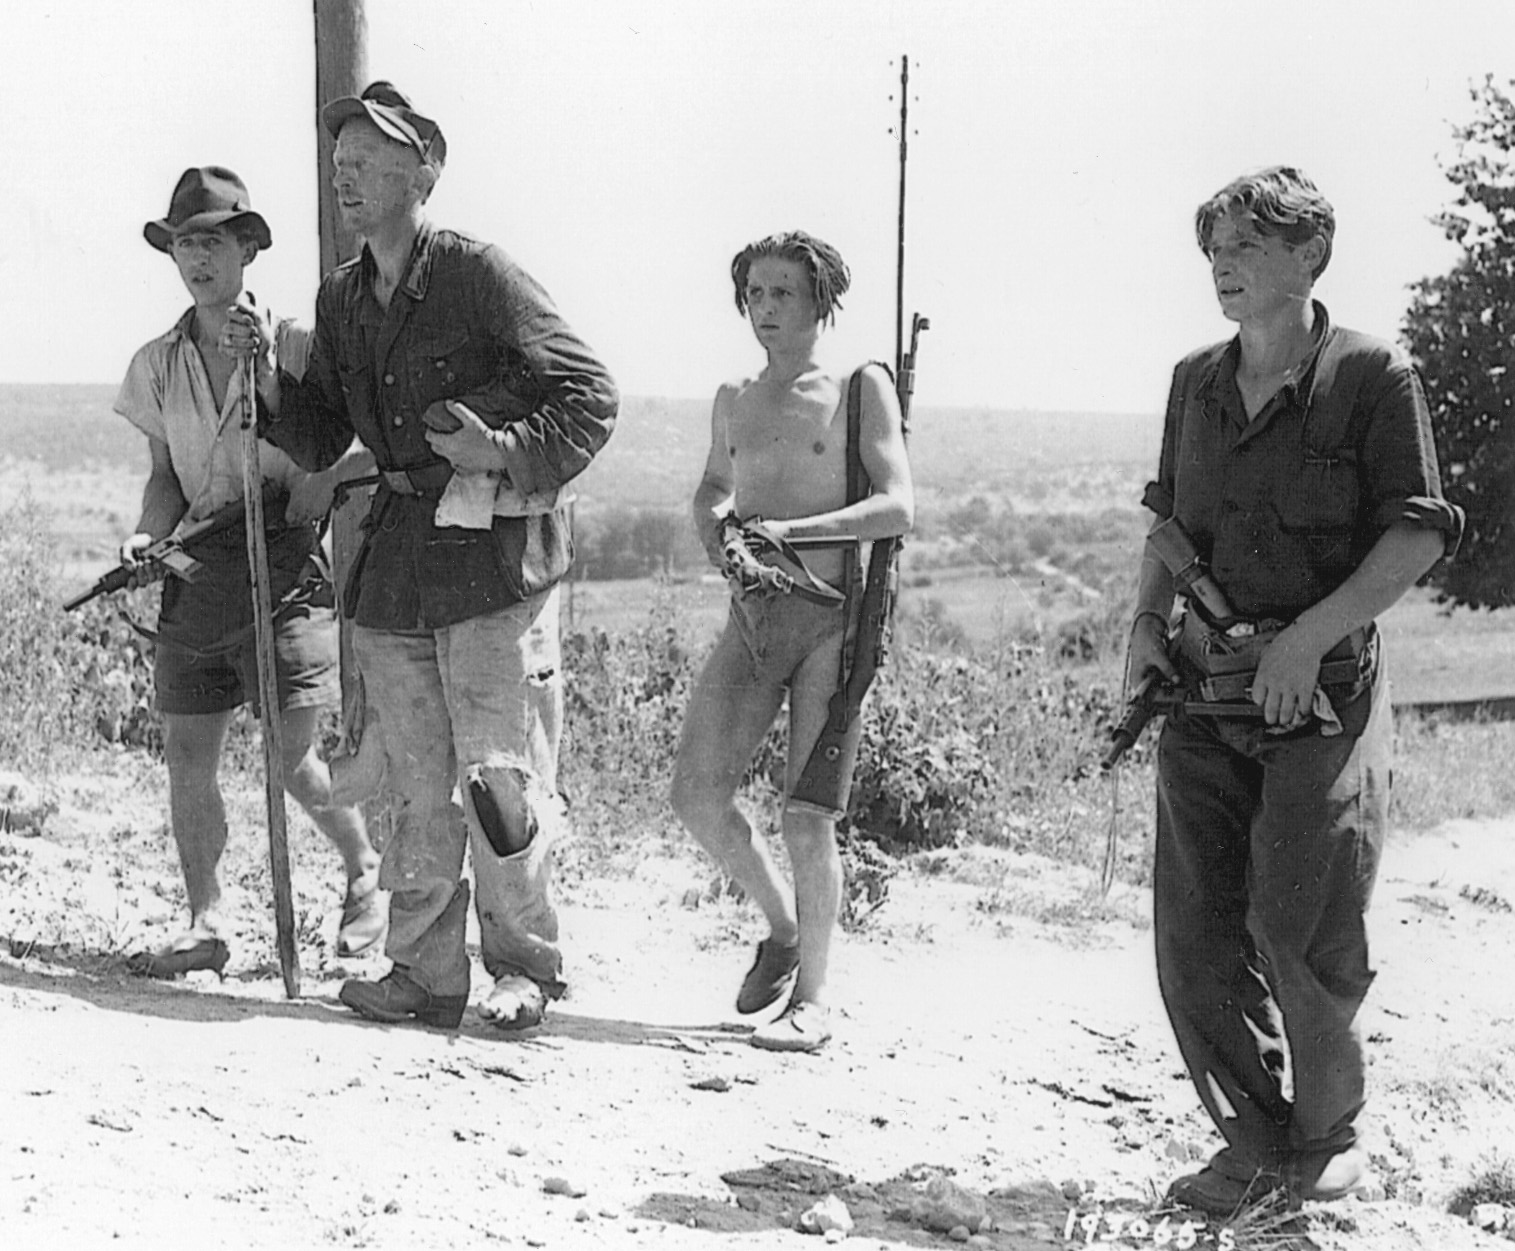 French Resistance fighters march a German prisoner into captivity in southern France, August 1944.